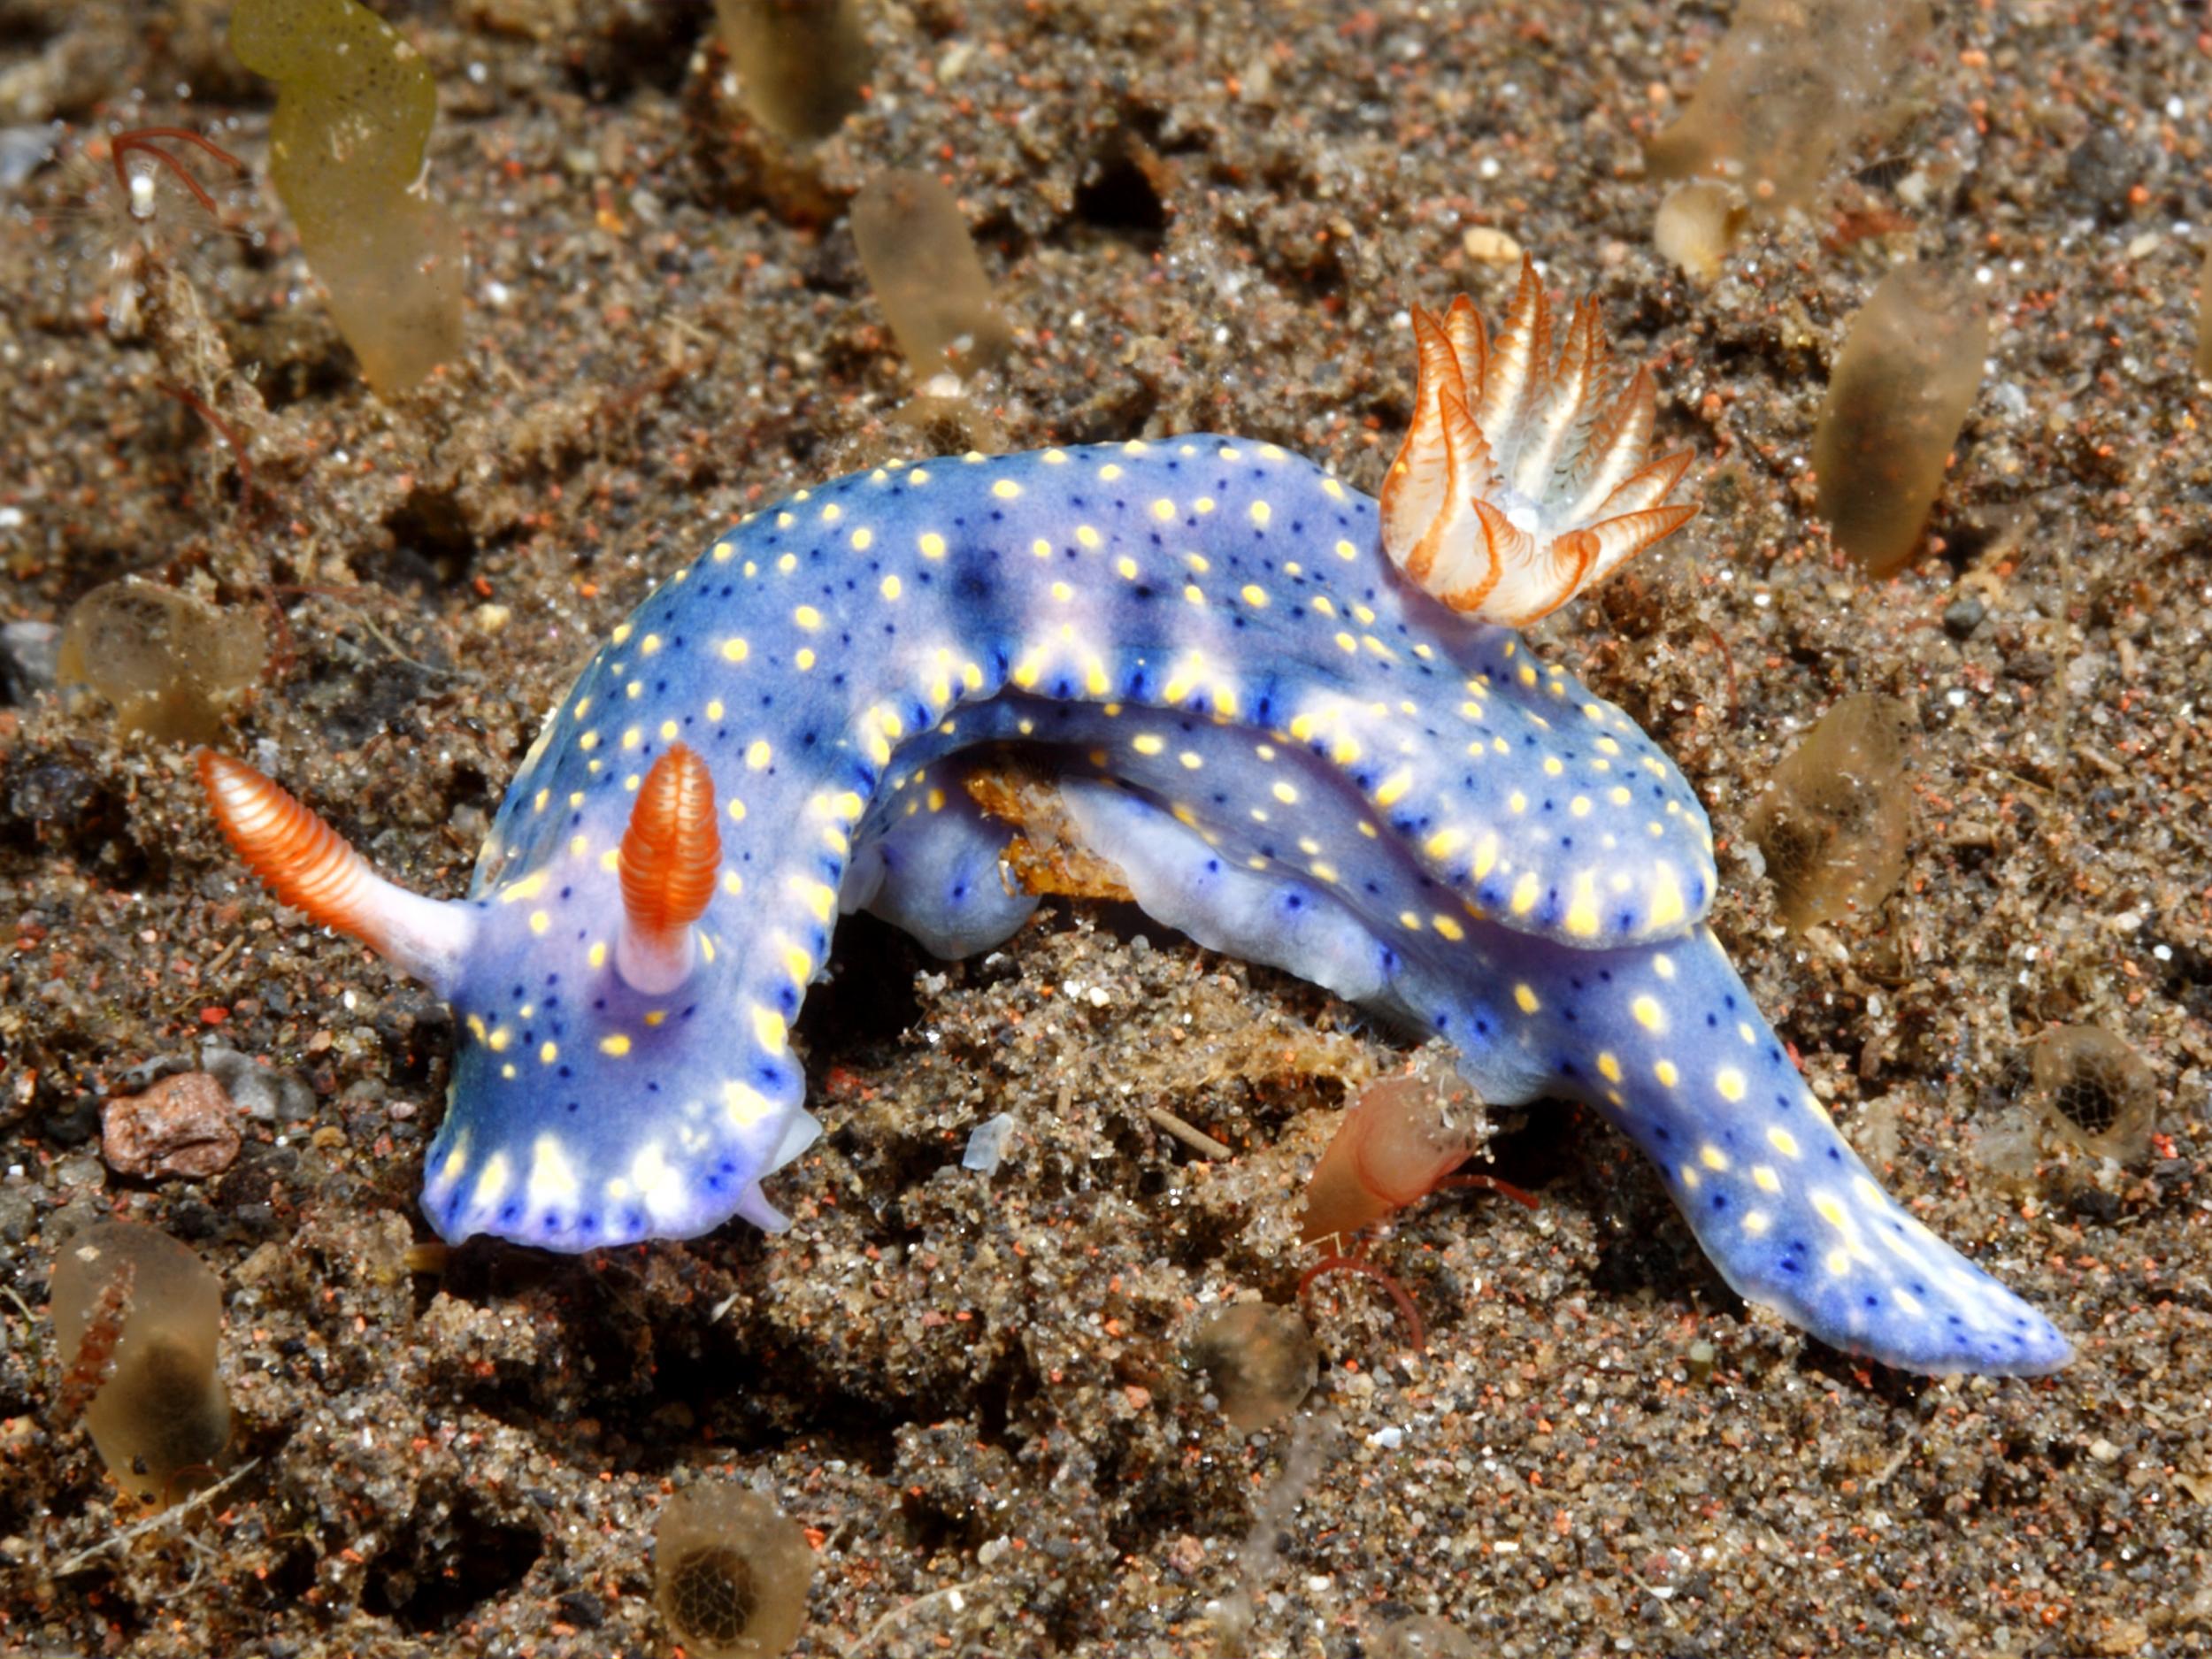 Scientists looked at nearly 300 species of sea slugs and other bottom-dwelling creatures to assess the impact of pace of life on survival over millennia